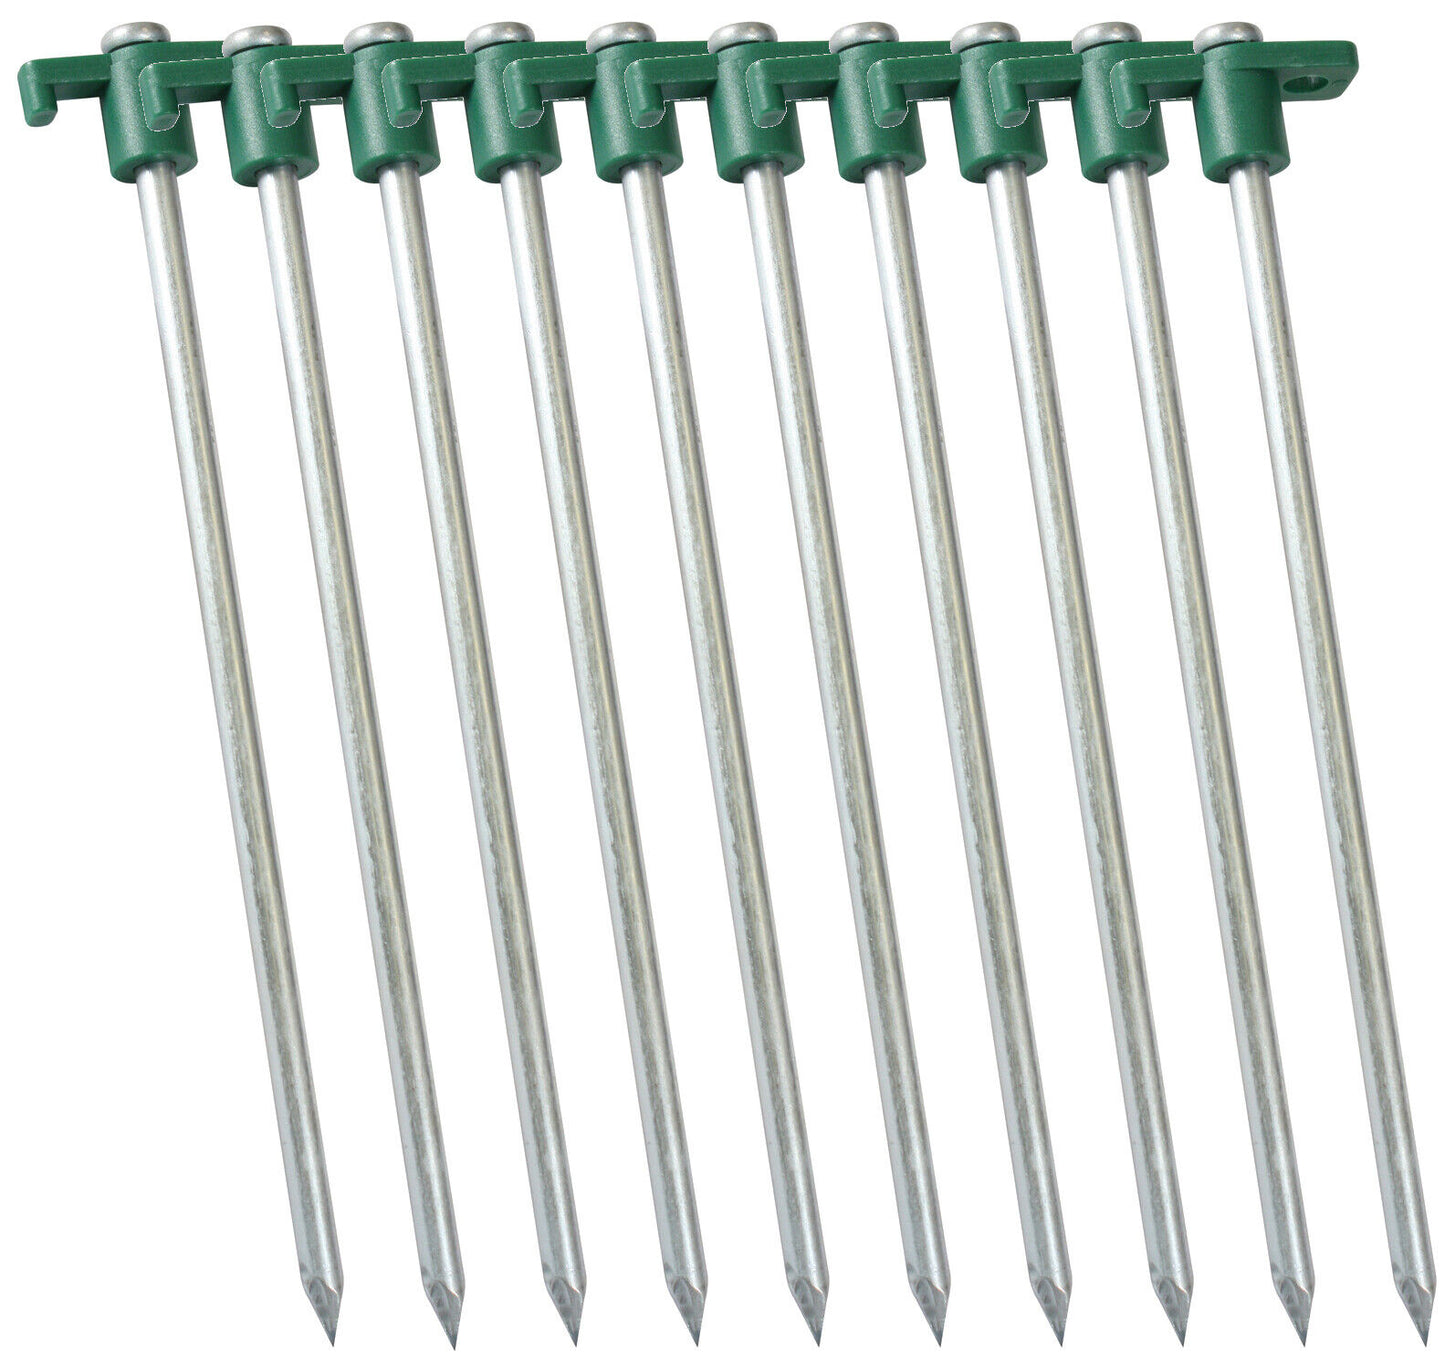 10 Inch Tent Stakes 10 Pack - Heavy Duty Nail Head Spike